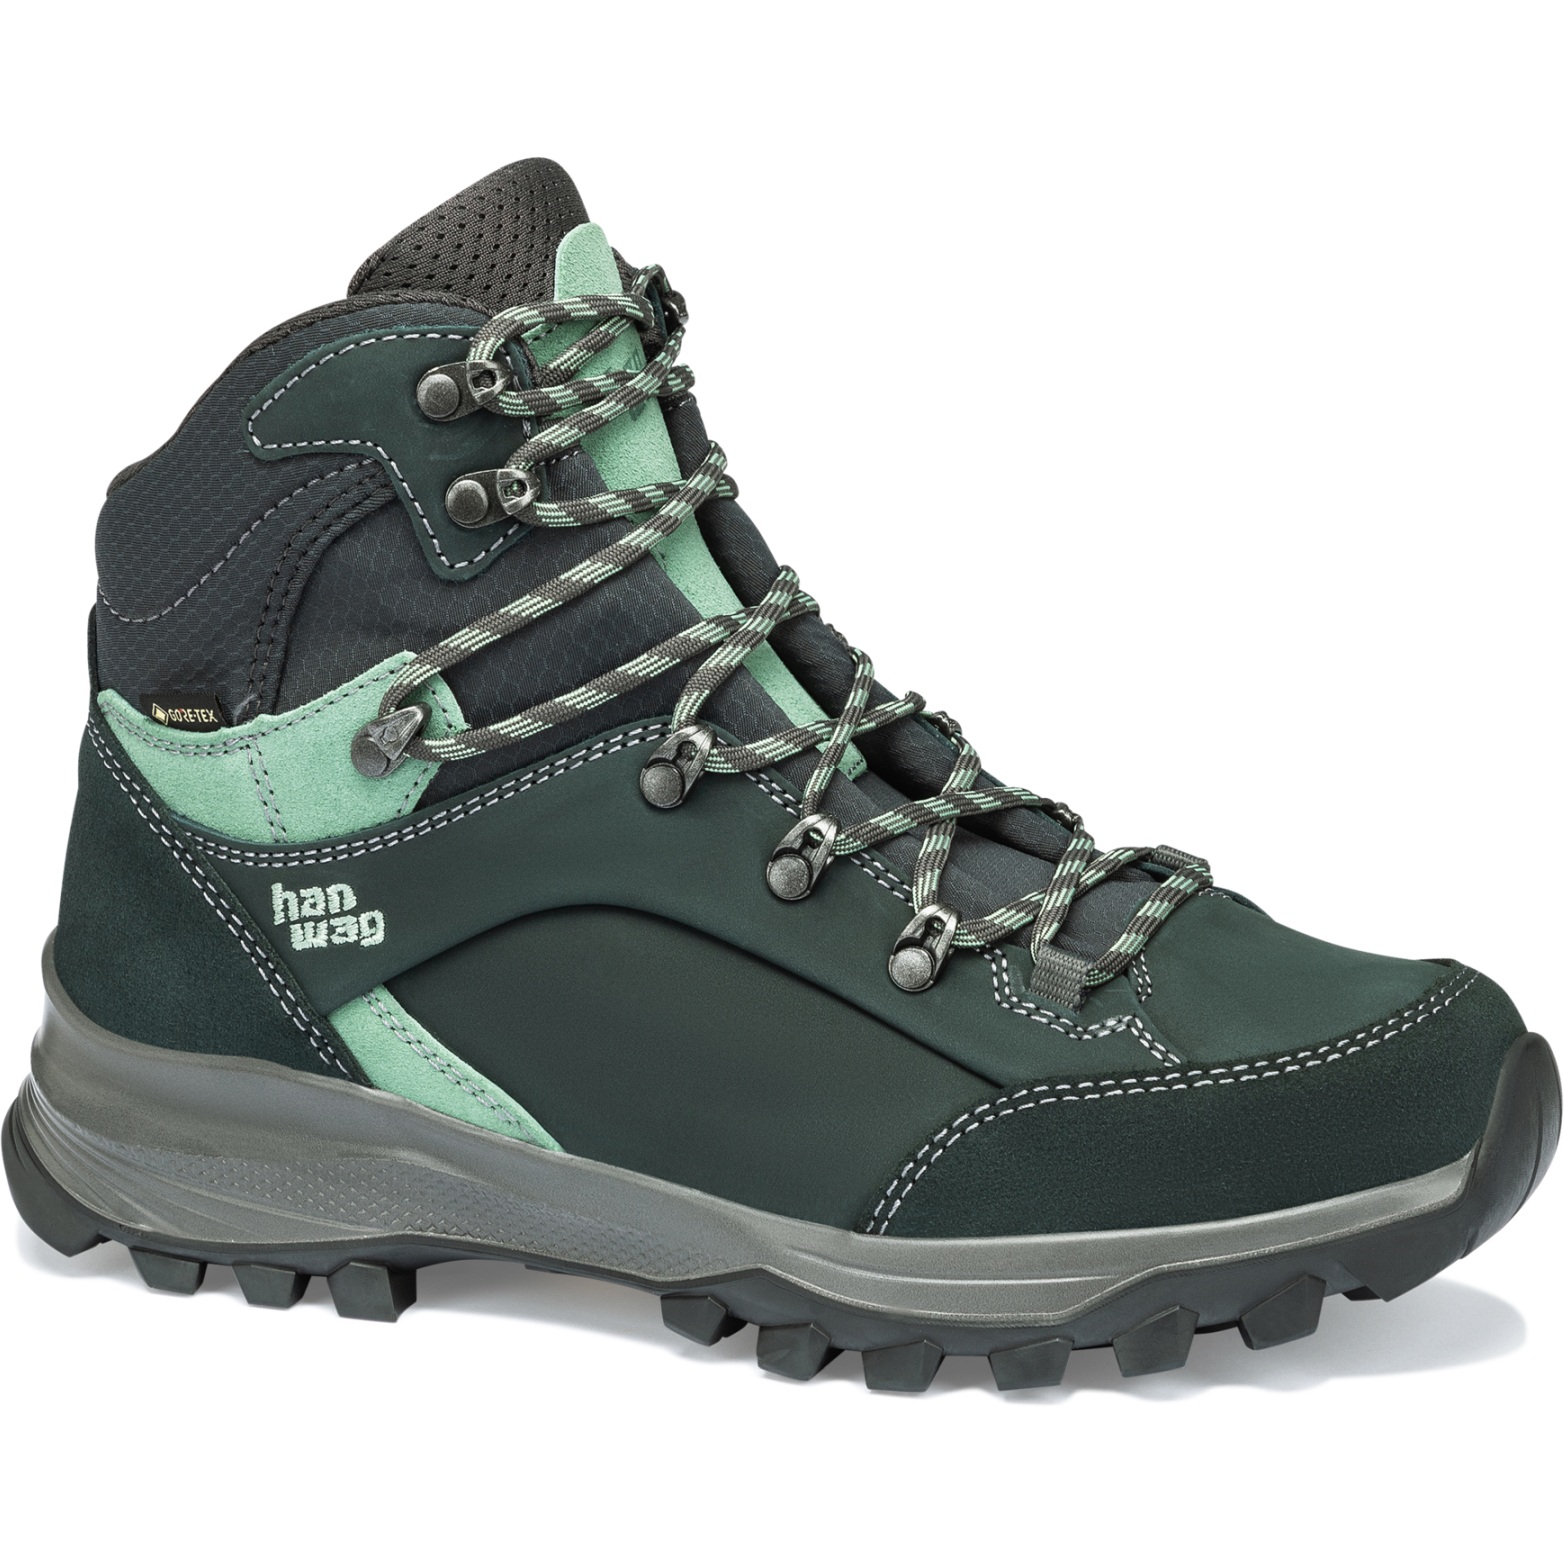 Image of Hanwag Banks Lady GTX Women's Hiking Shoes - Petrol/ Mint